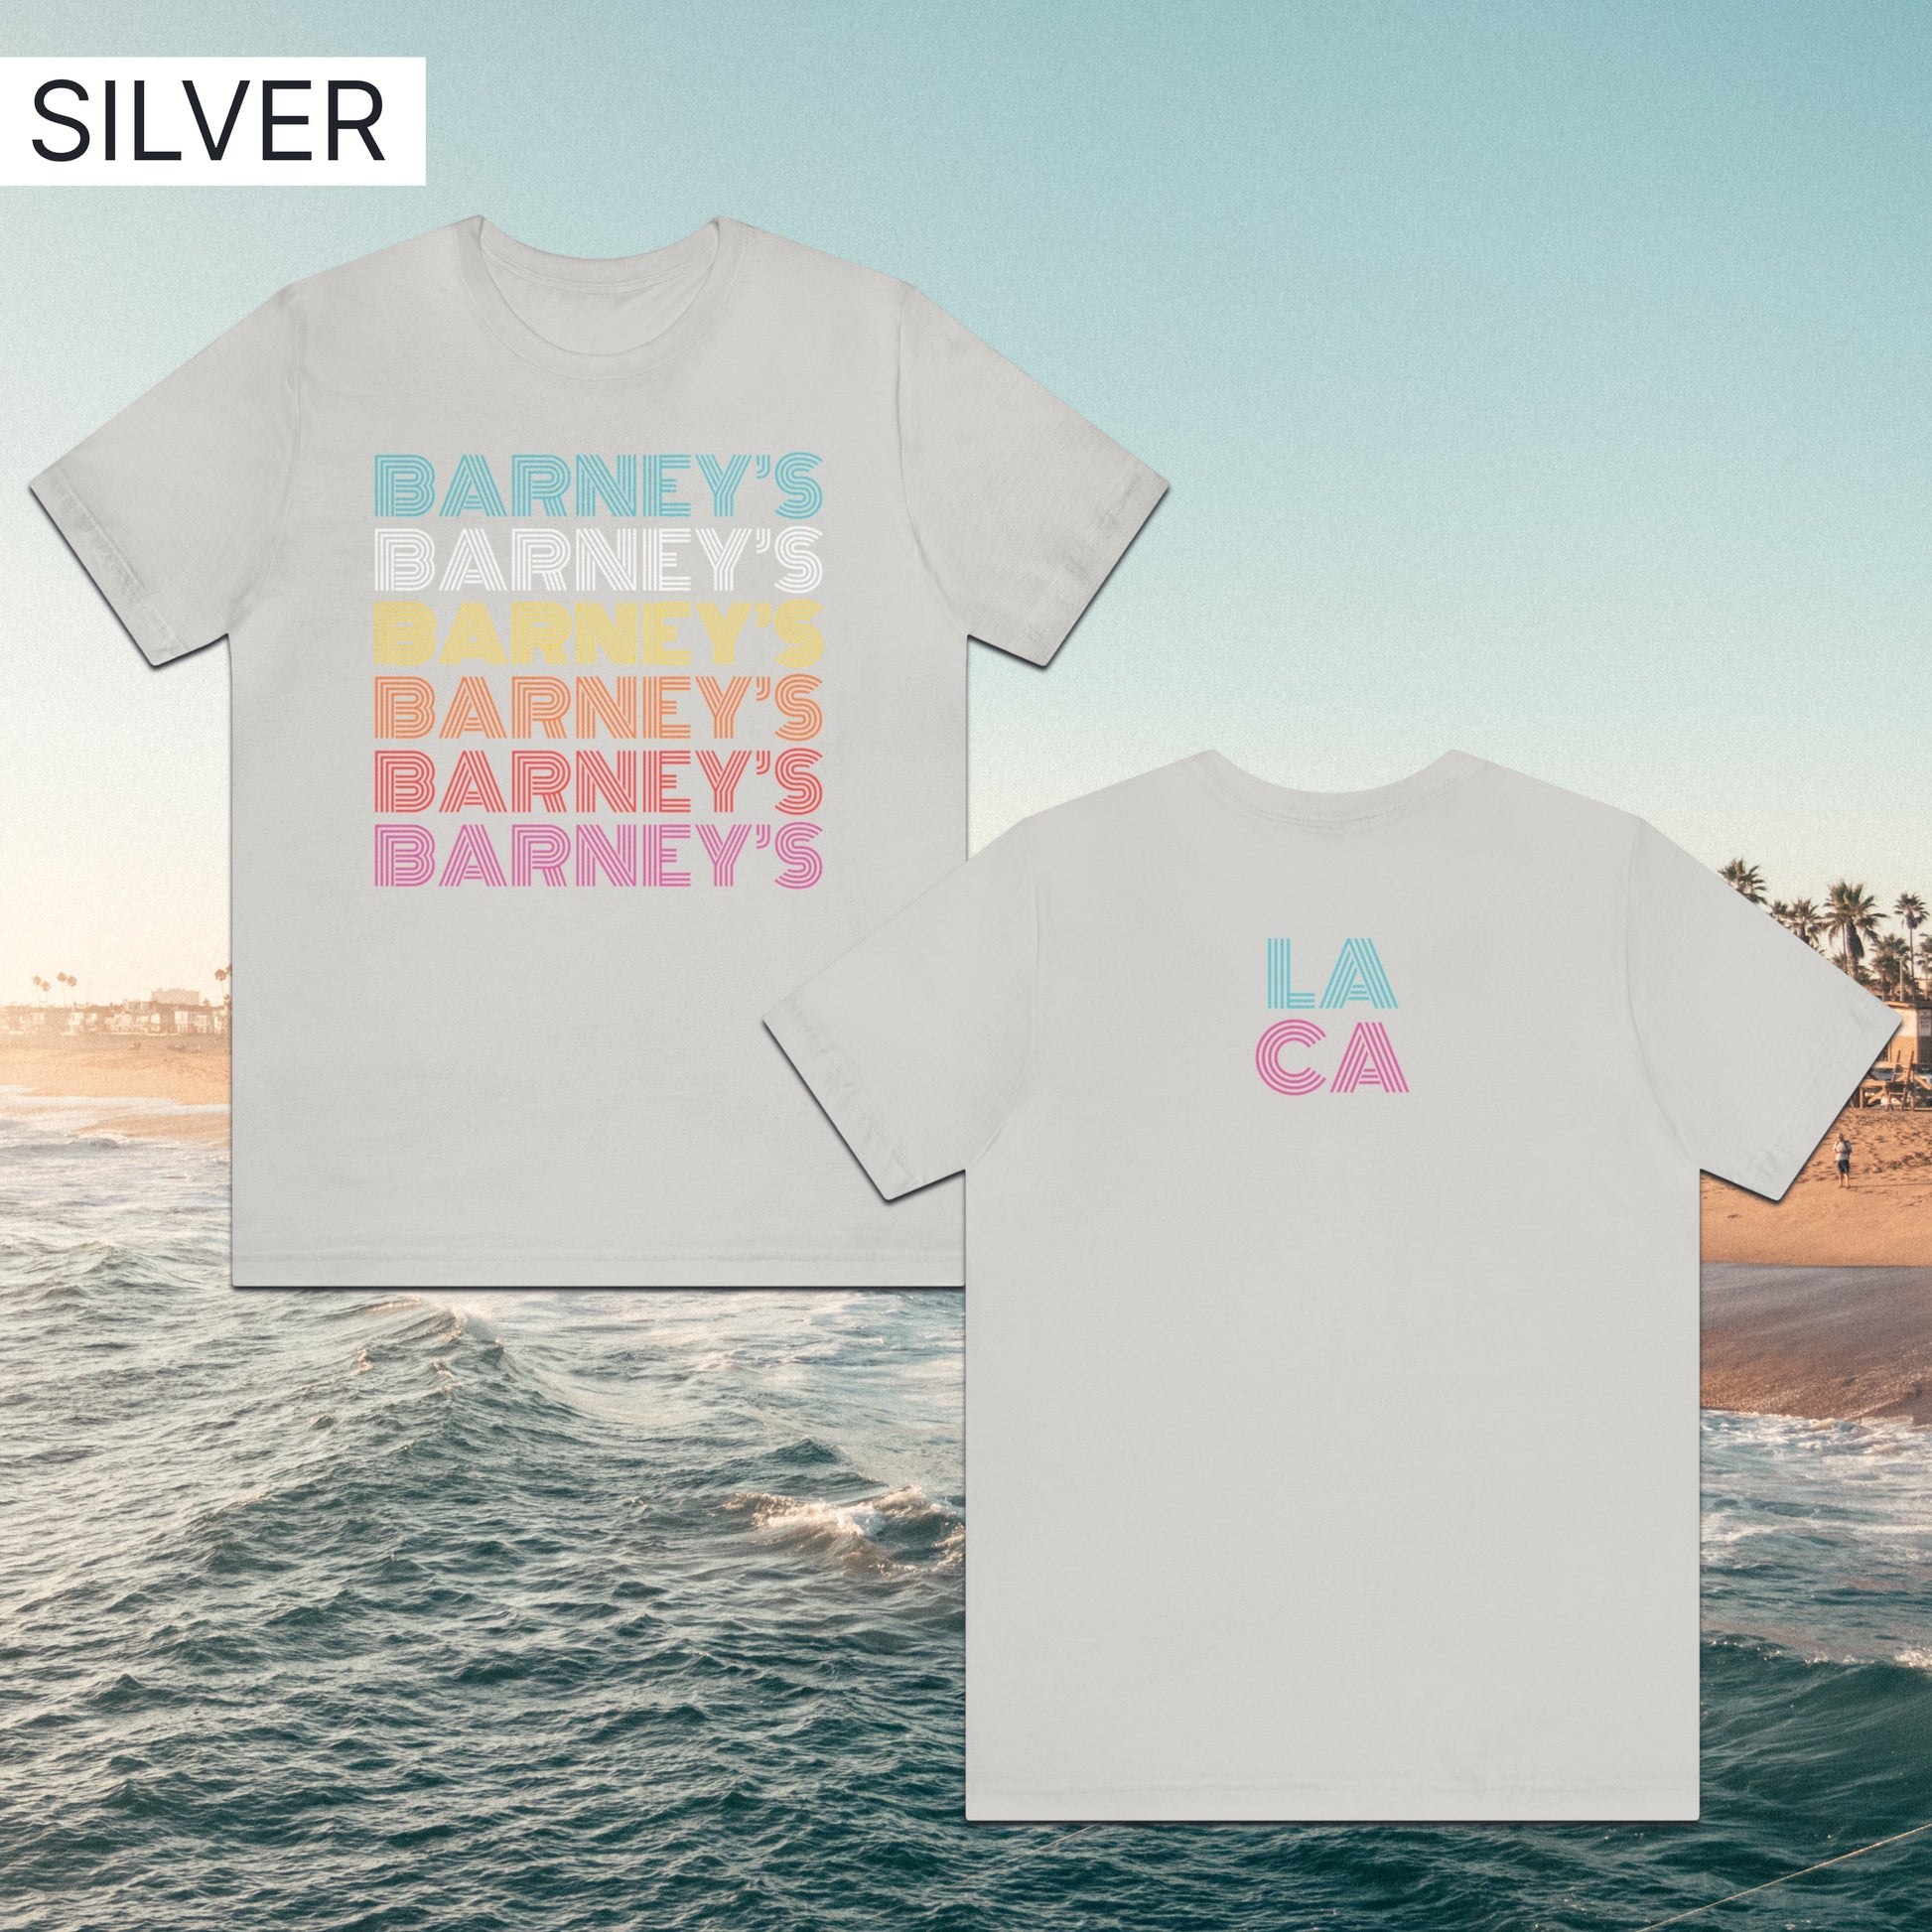 Barney's x6 Retro Hollywood | BARNEY'S BEANERY - Women's Retro Graphic Tee | Silver Bella+Canvas 3001 T-Shirt - Front And Back Flat Lay View